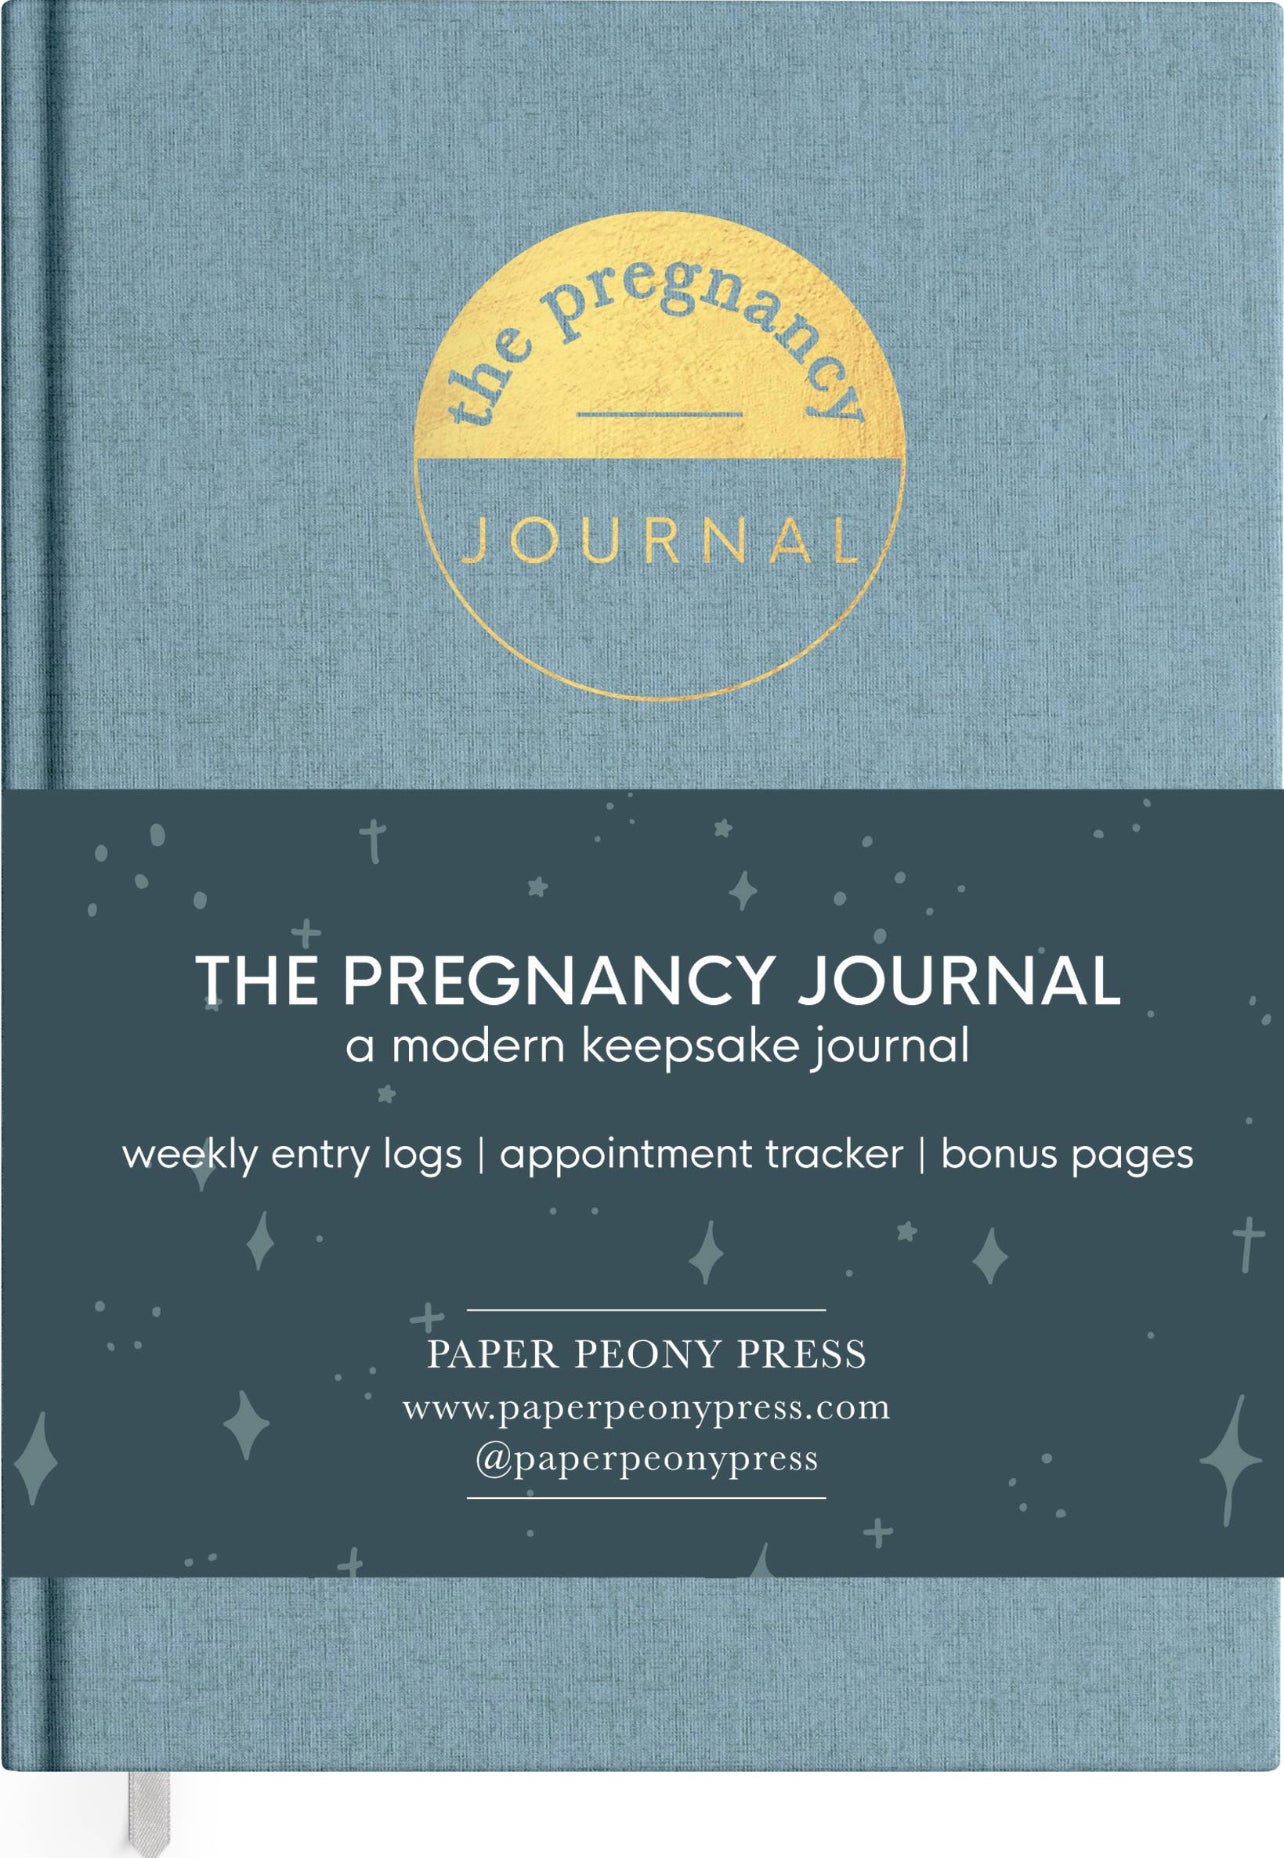 Paper Peony Press - The Pregnancy Journal